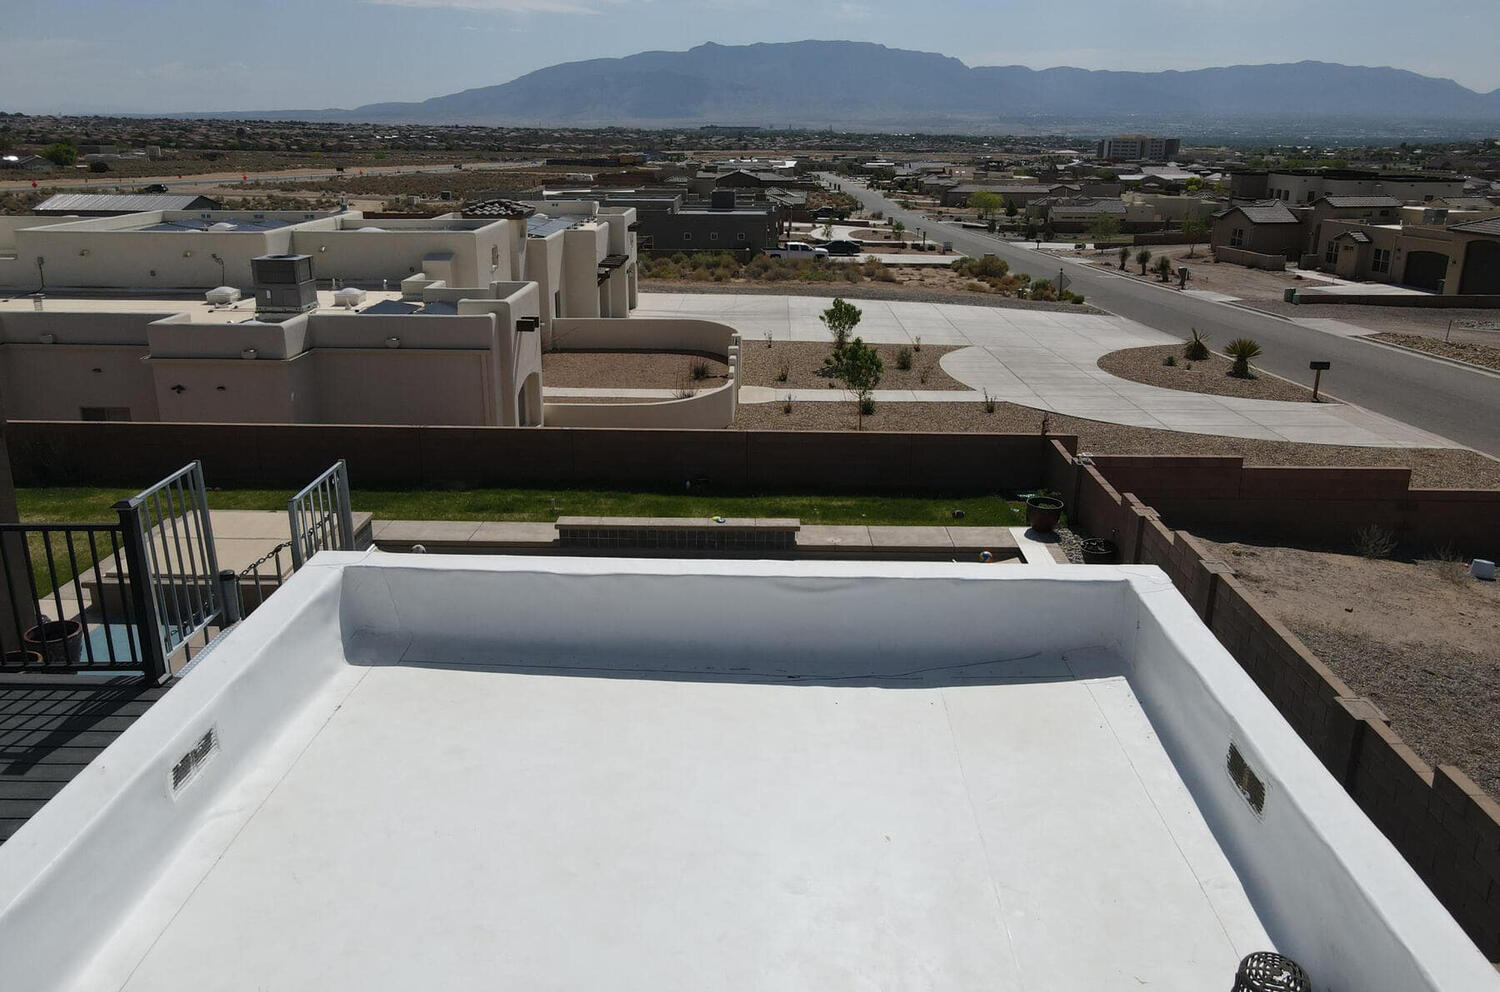 New white TPO (Thermoplastic Polyolefin) roofing material installed on a residential roof in Rio Rancho, New Mexico.